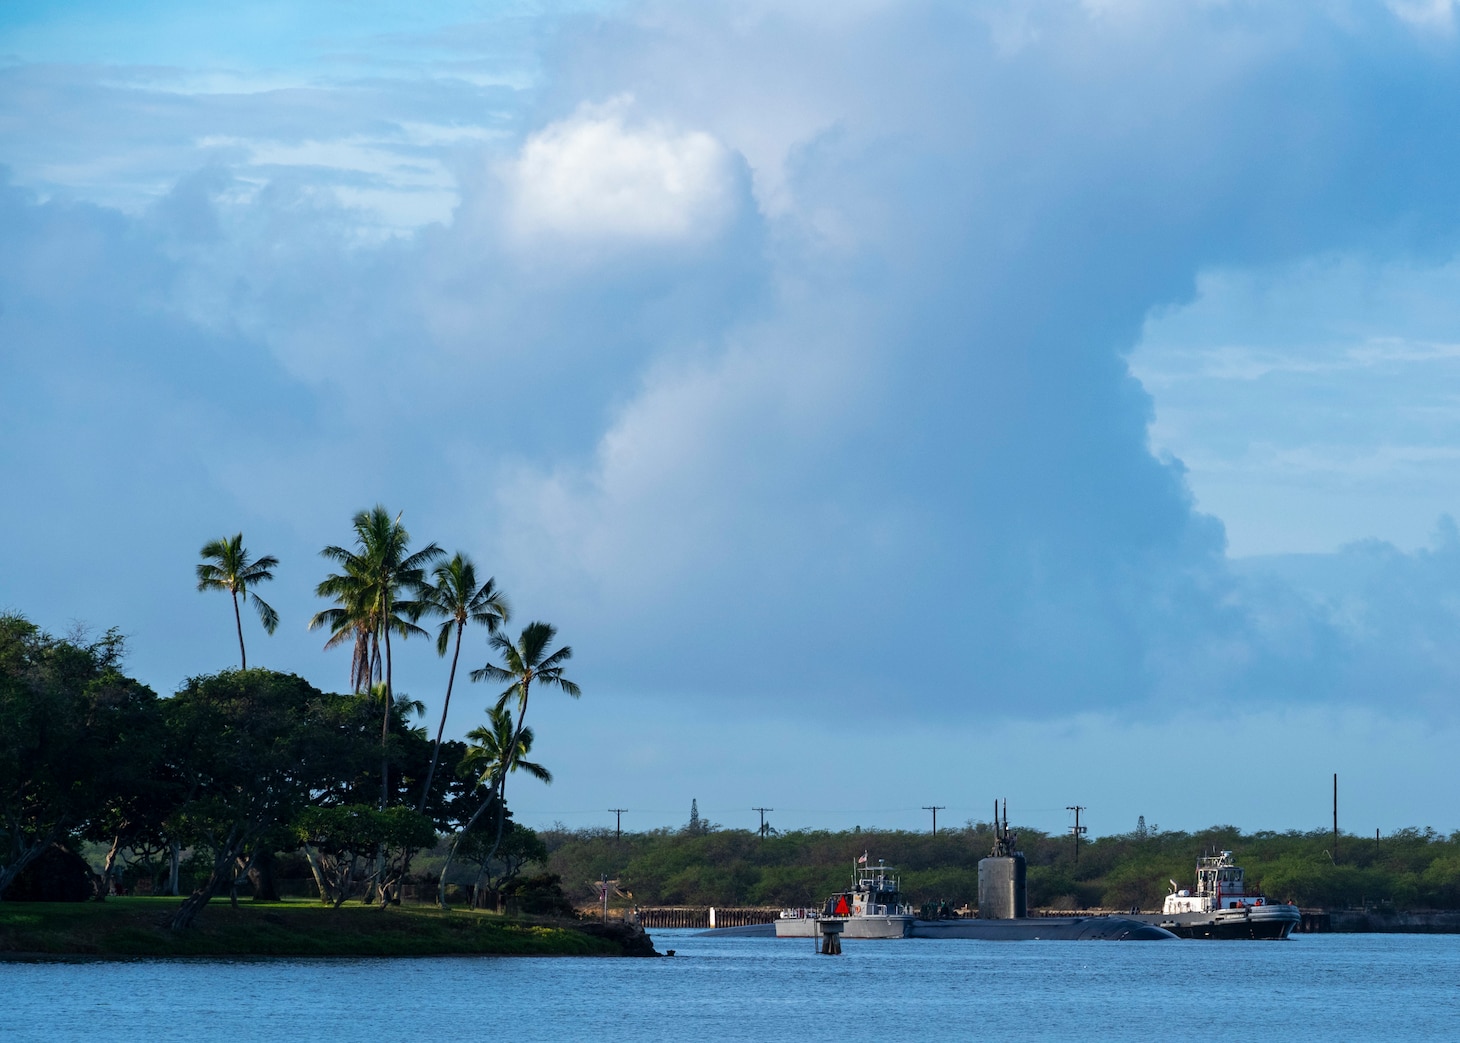 PEARL HARBOR, Hawaii (Dec. 15, 2020) - The Los Angeles-class fast-attack submarine USS Topeka (SSN 754) arrives in Pearl Harbor, Hawaii, after completing a change of homeport from Guam, Dec. 15. Topeka’s ability to support a multitude of missions, including anti-submarine warfare, anti-surface ship warfare, strike warfare, surveillance and reconnaissance, has made Topeka one of the most capable submarines in the world. (U.S. Navy Photo by Chief Mass Communication Specialist Amanda R. Gray/Released)